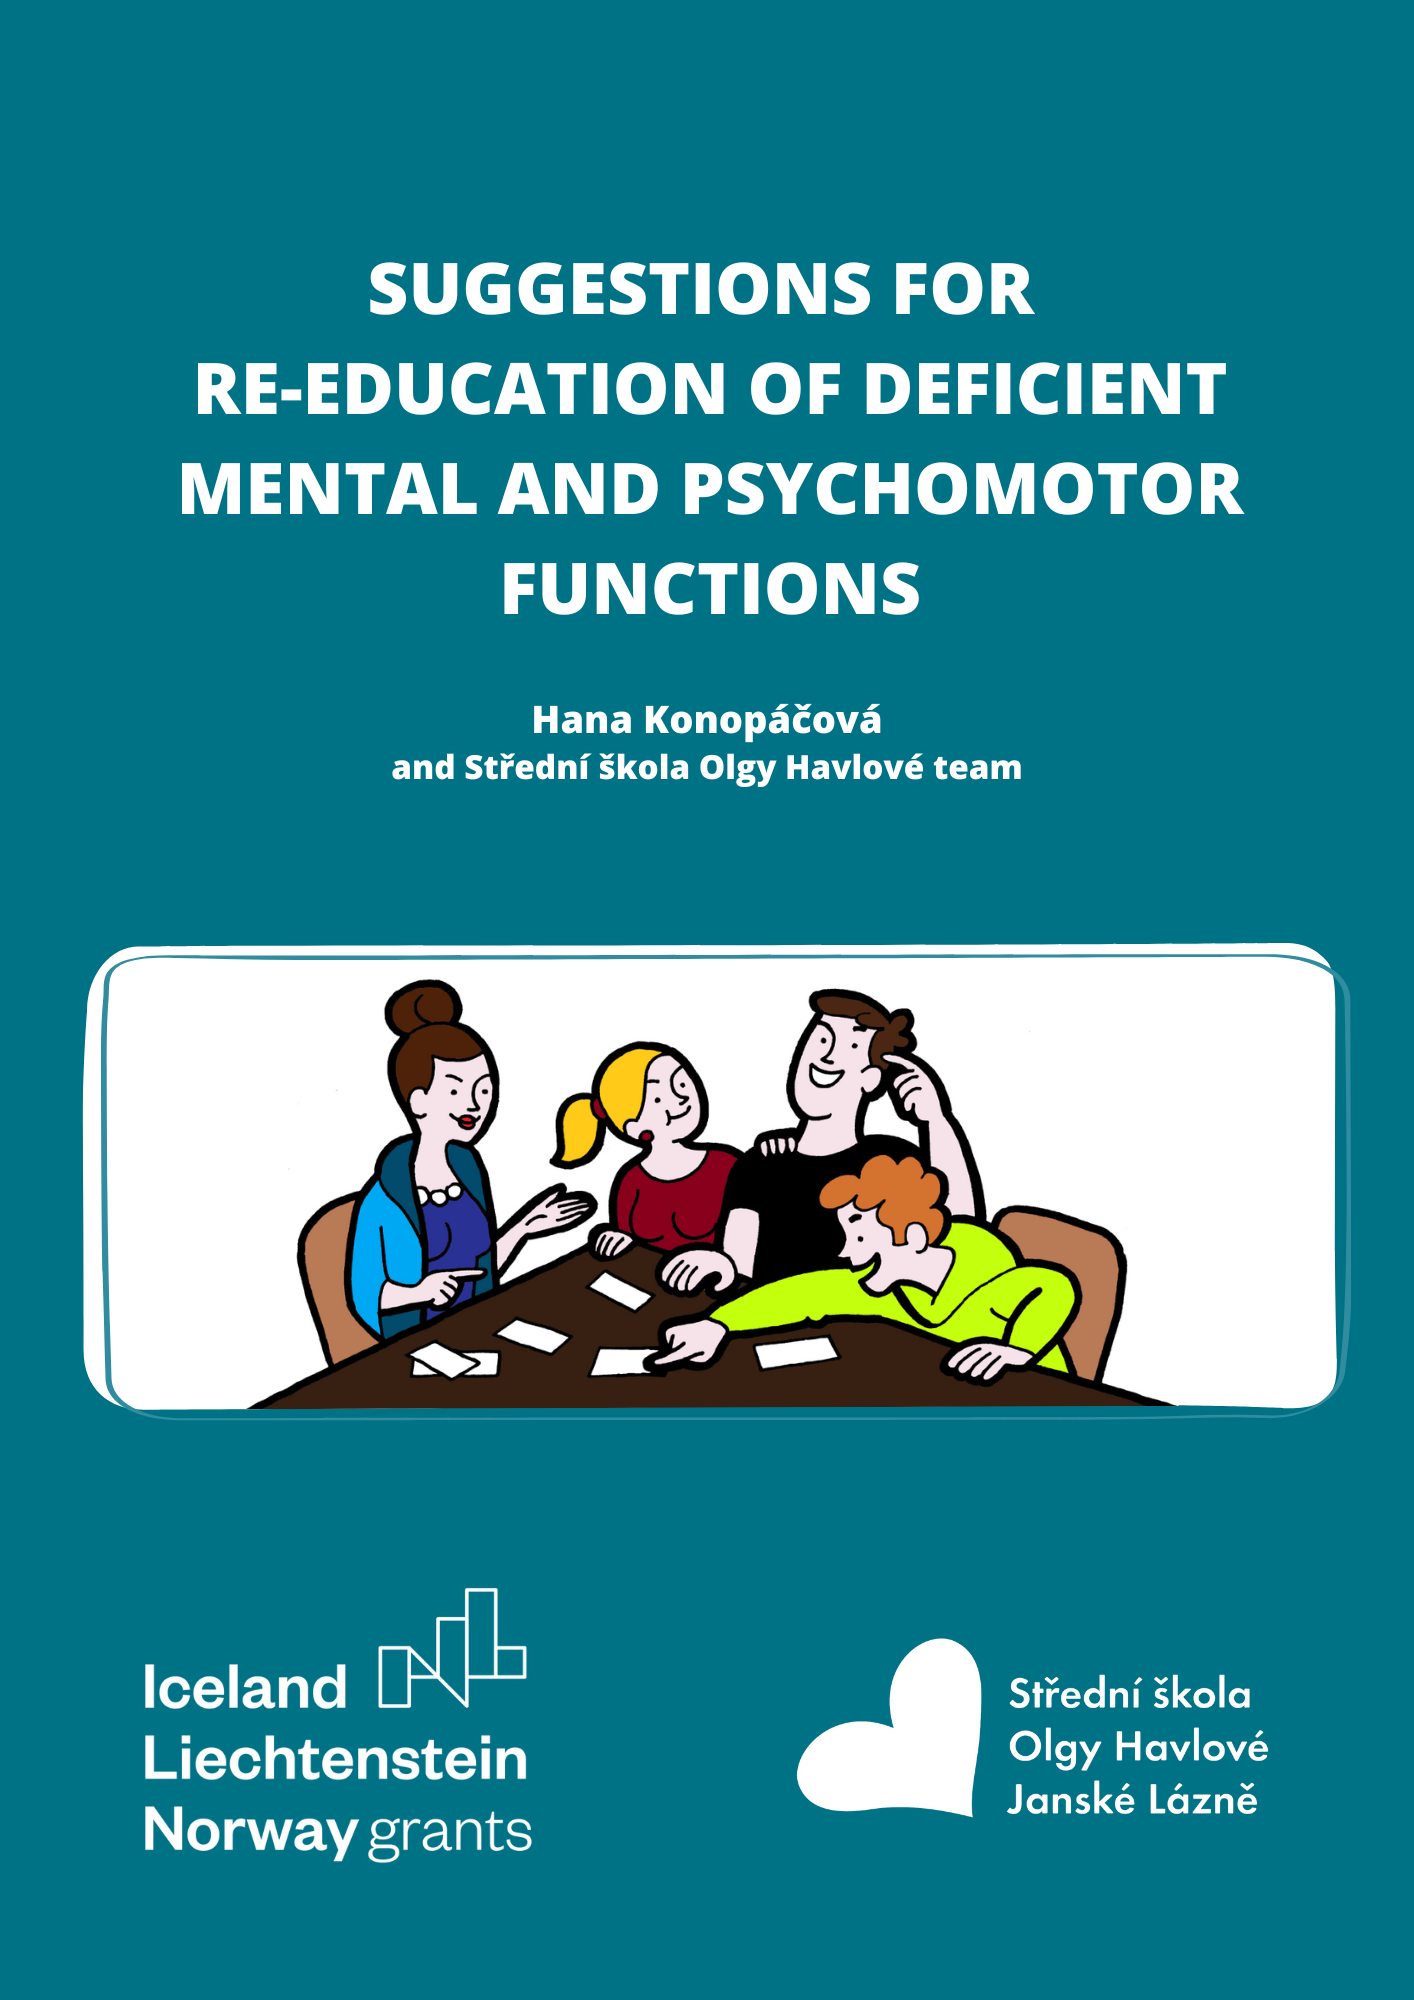 Suggestions for re-education or deficient mental and psychomotor functions